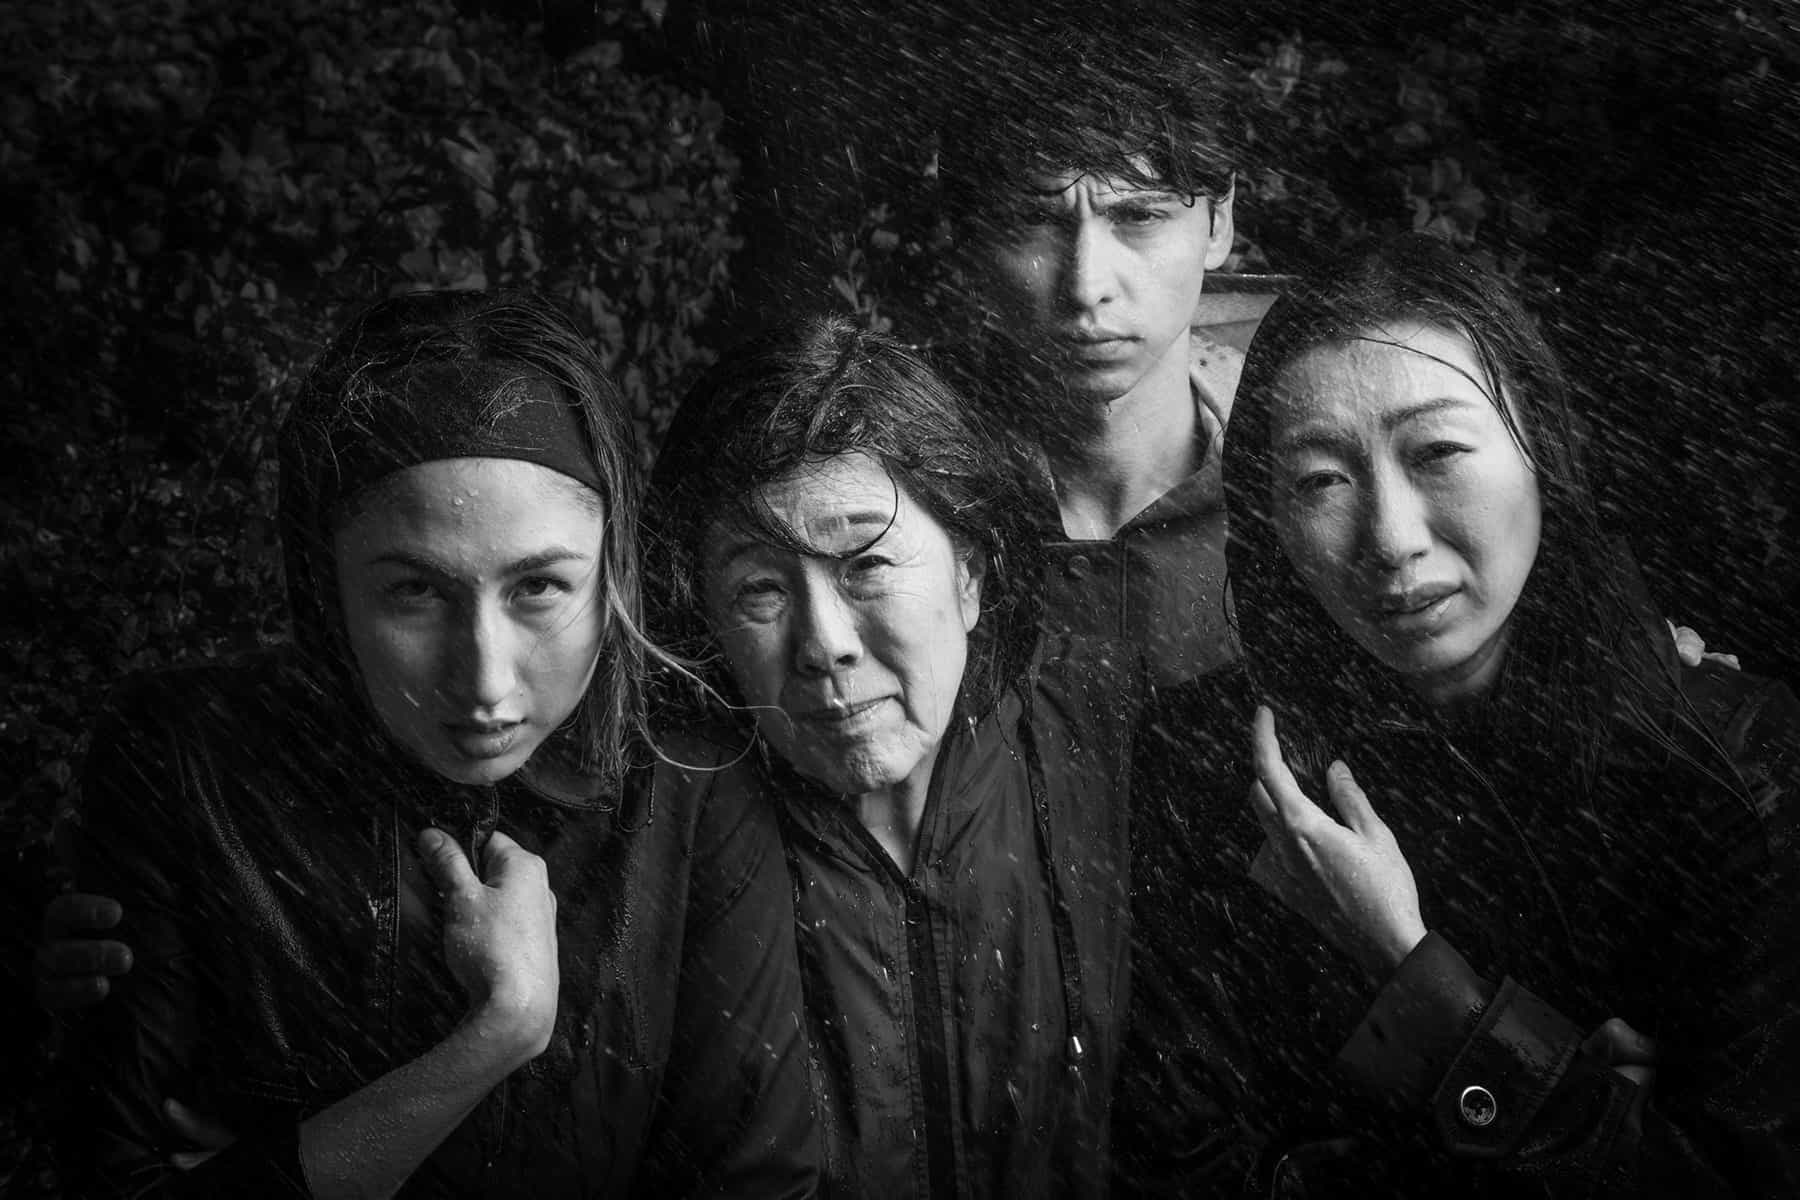 promotional image for "The Great Wave" at Berkeley Rep: four people huddled in a rainstorm getting drenched, lit dramatically